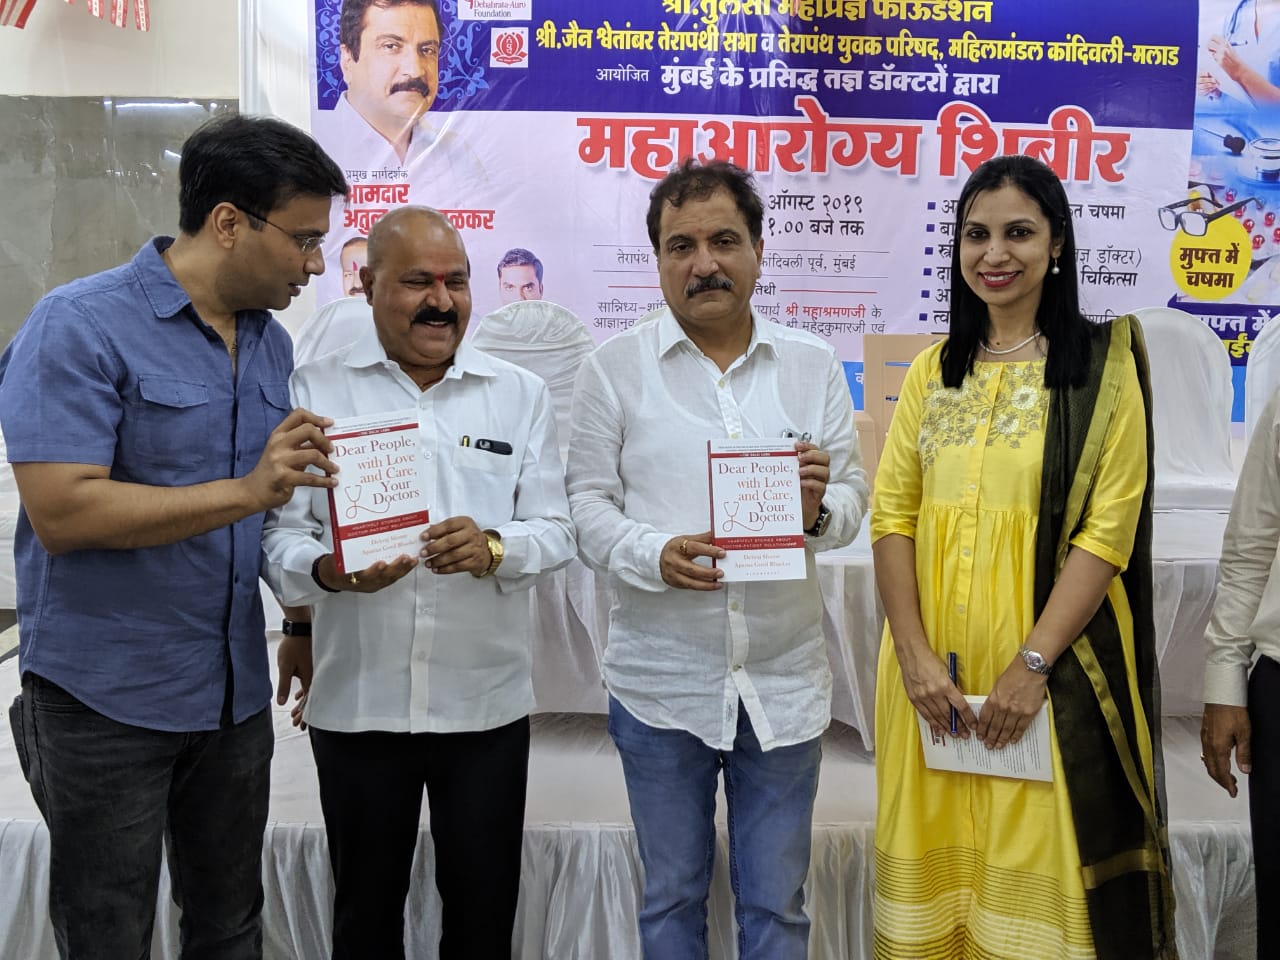 From L to R De Debraj Shome with MLA and Dr Aparna Govil book launch at medical camp in poisar